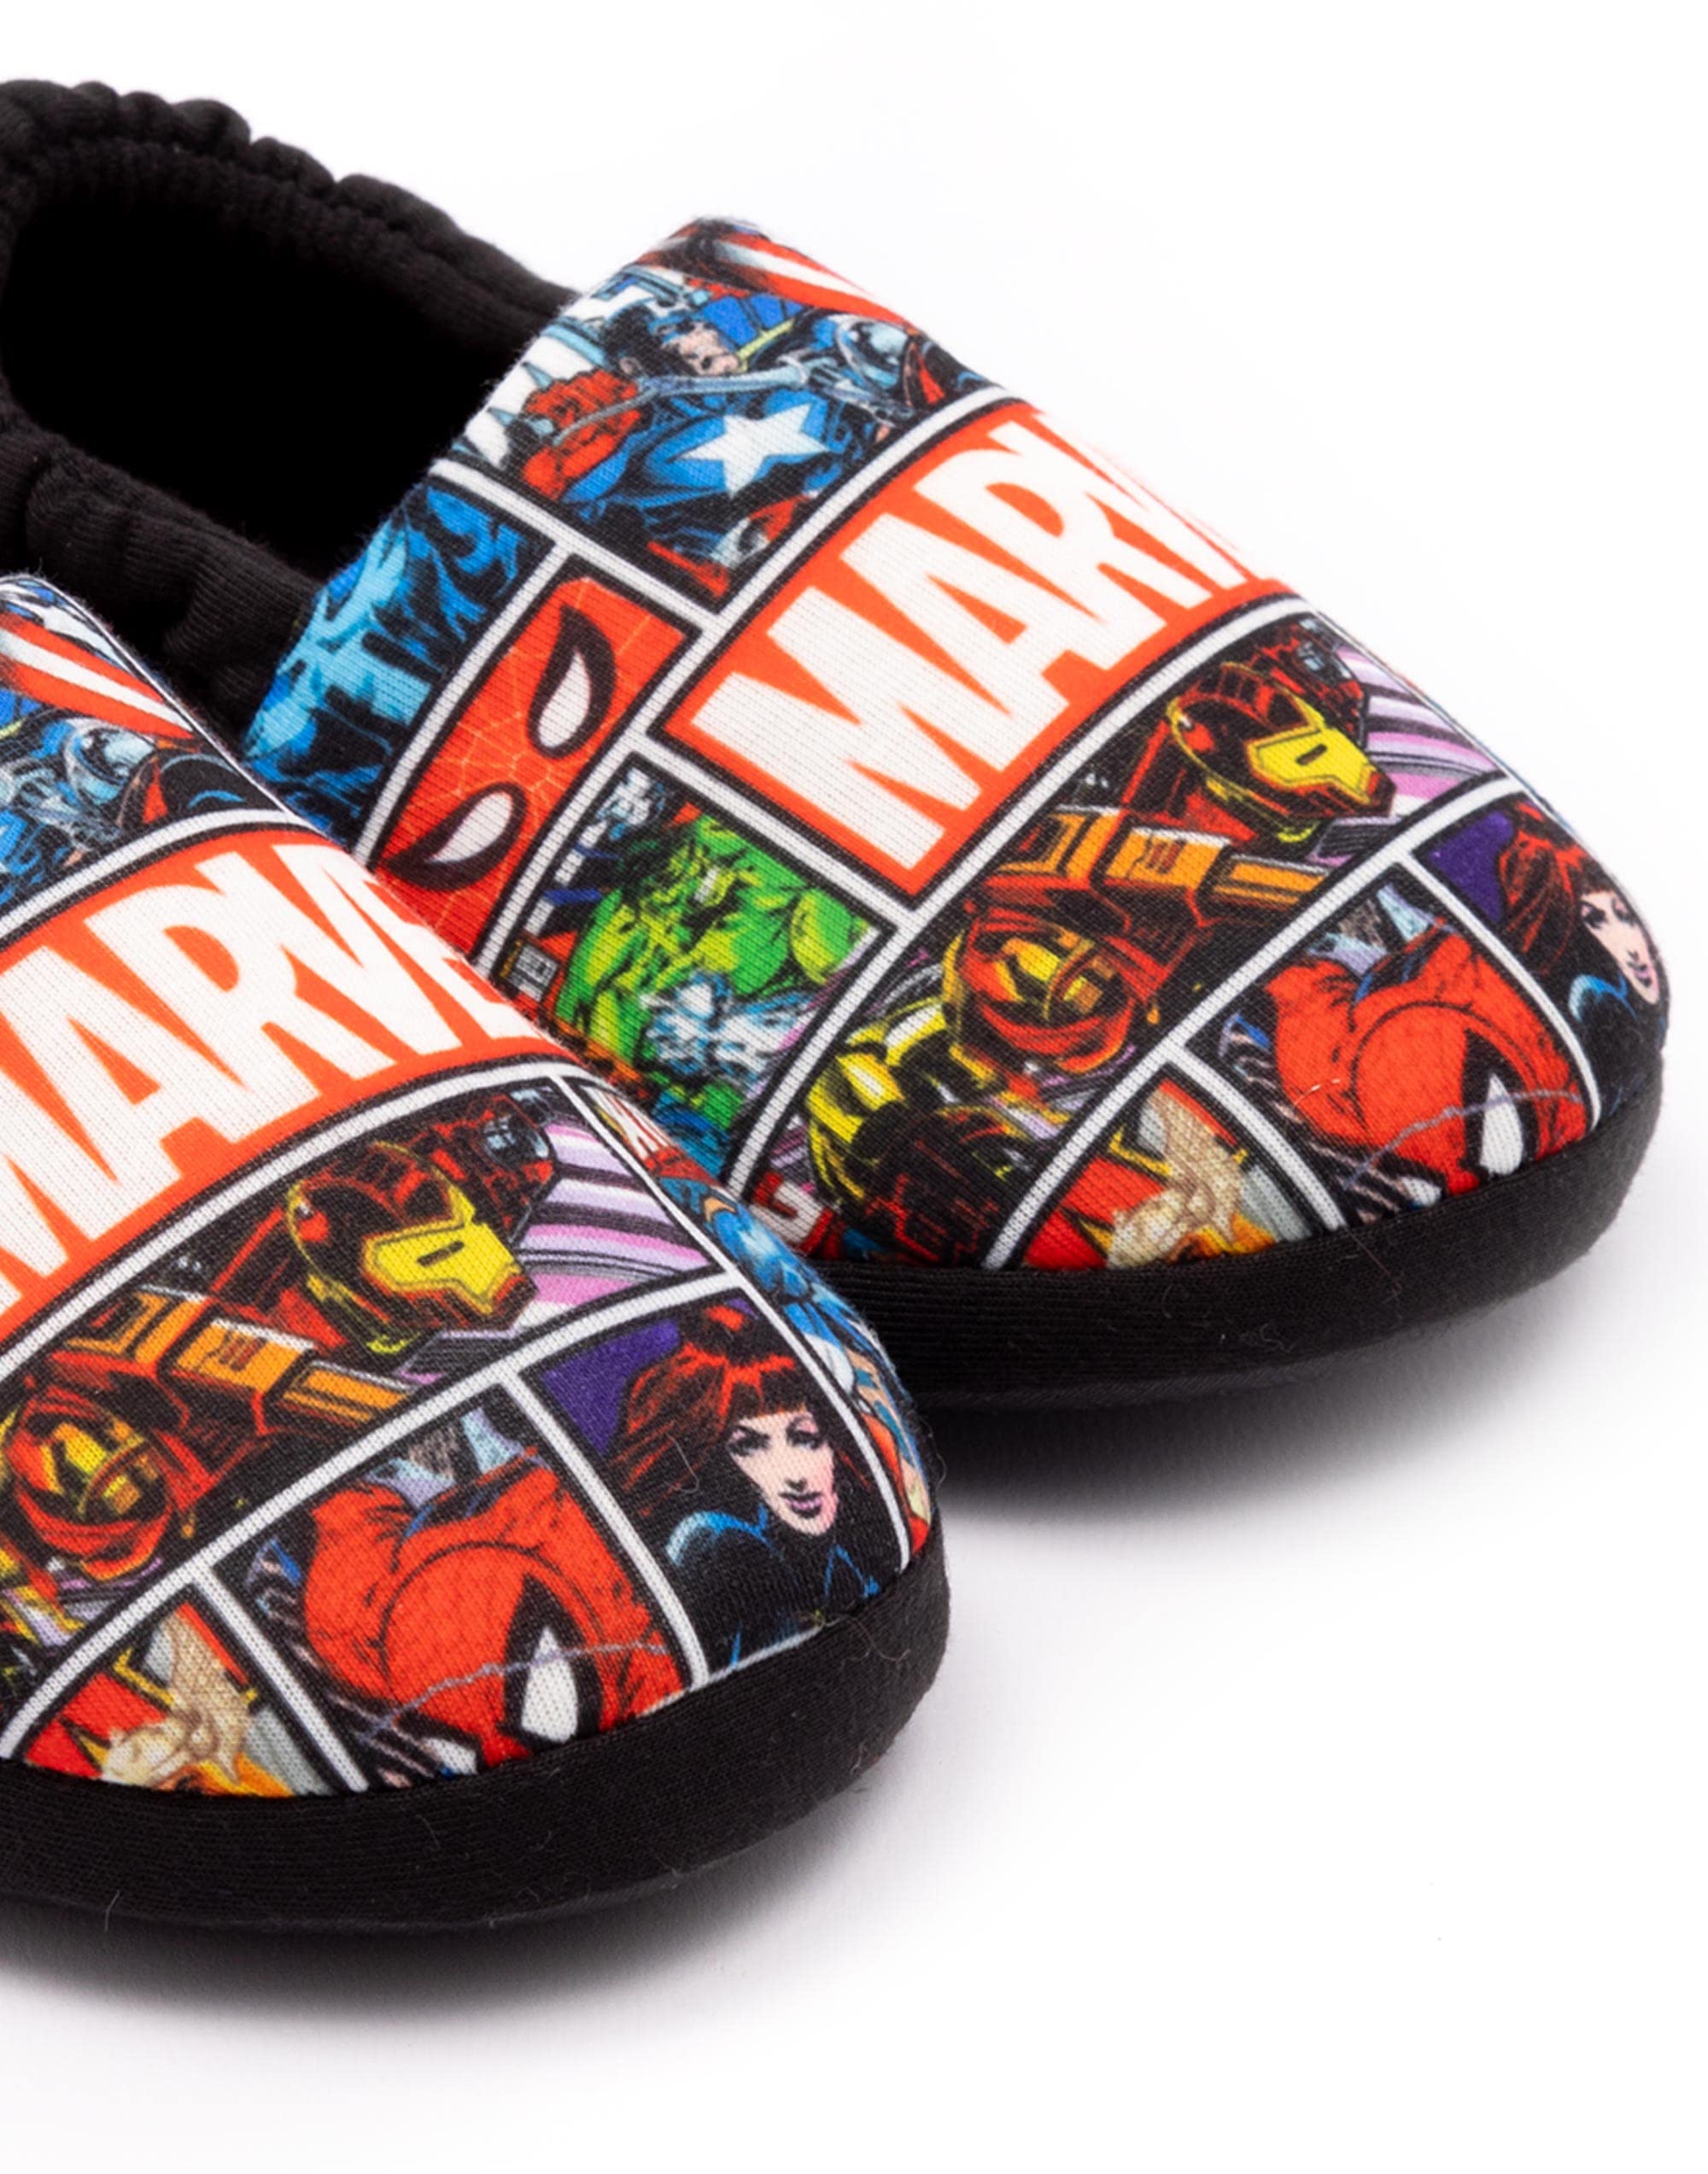 Marvel Avengers Slippers Boys Kids Comic House Shoes Loafers